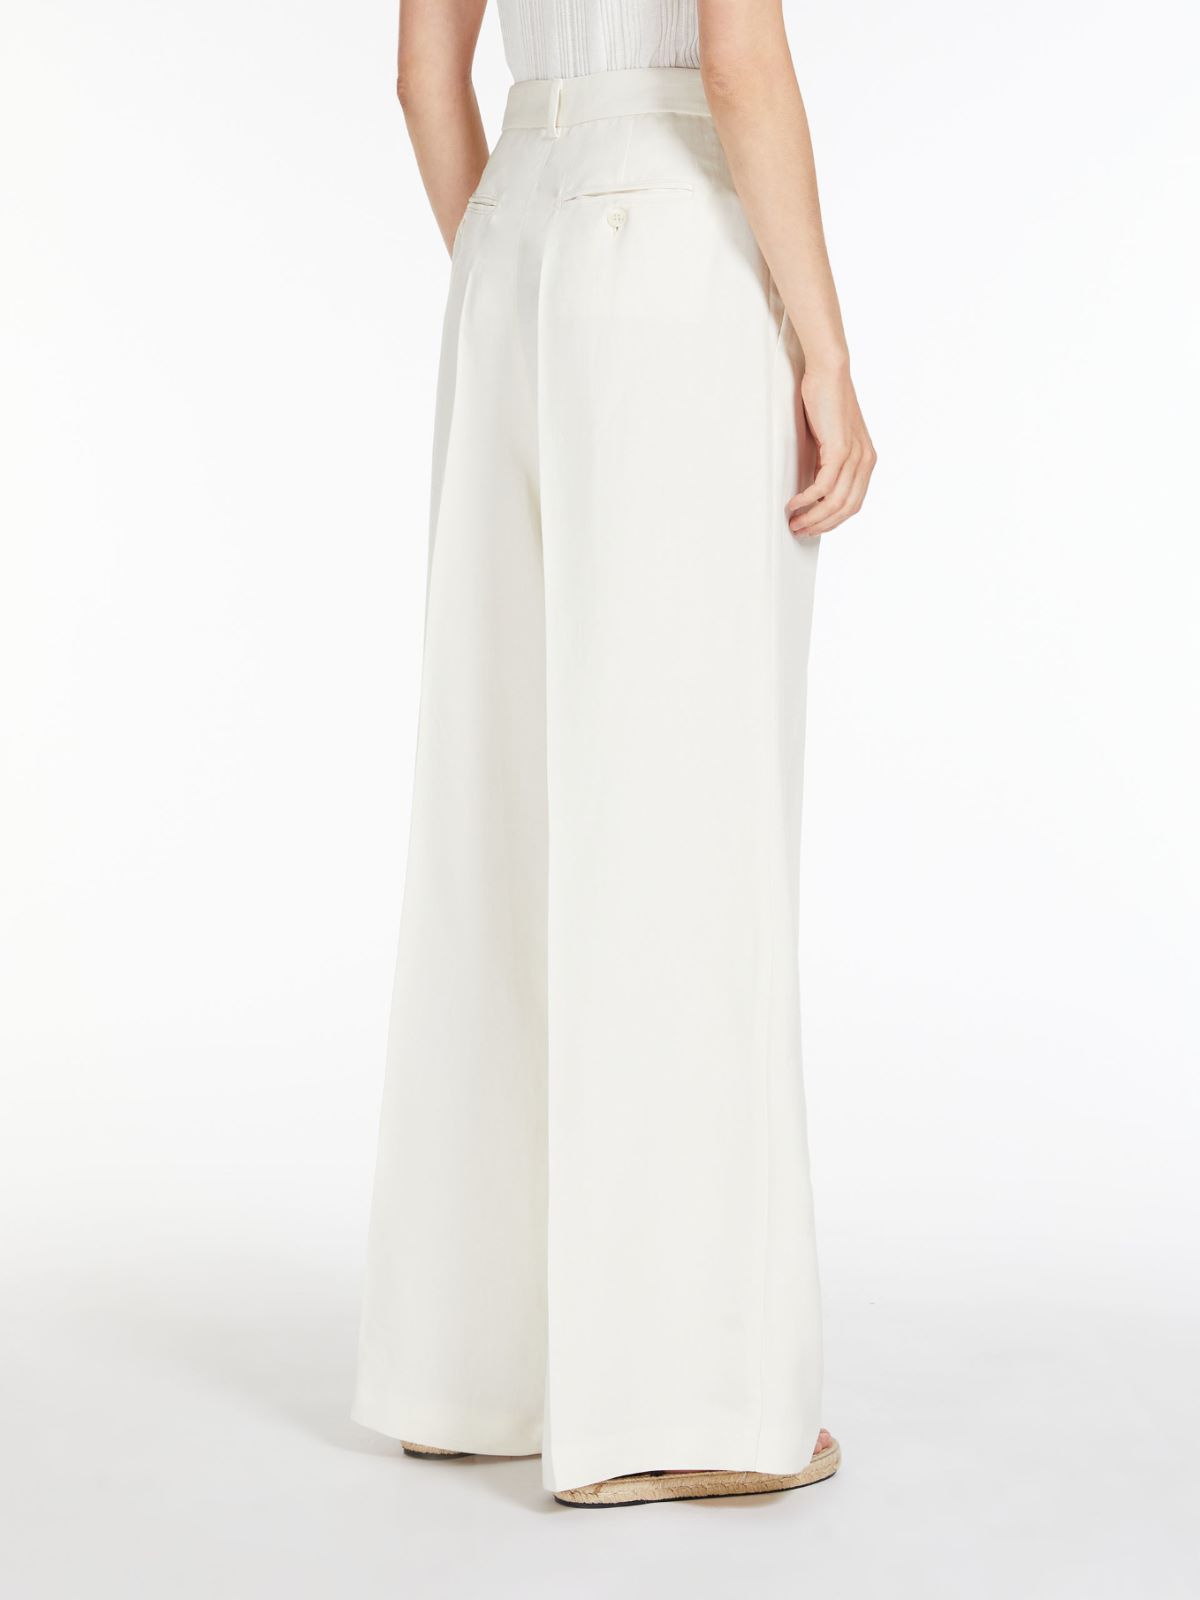 Viscose and linen trousers - IVORY - Weekend Max Mara - 3